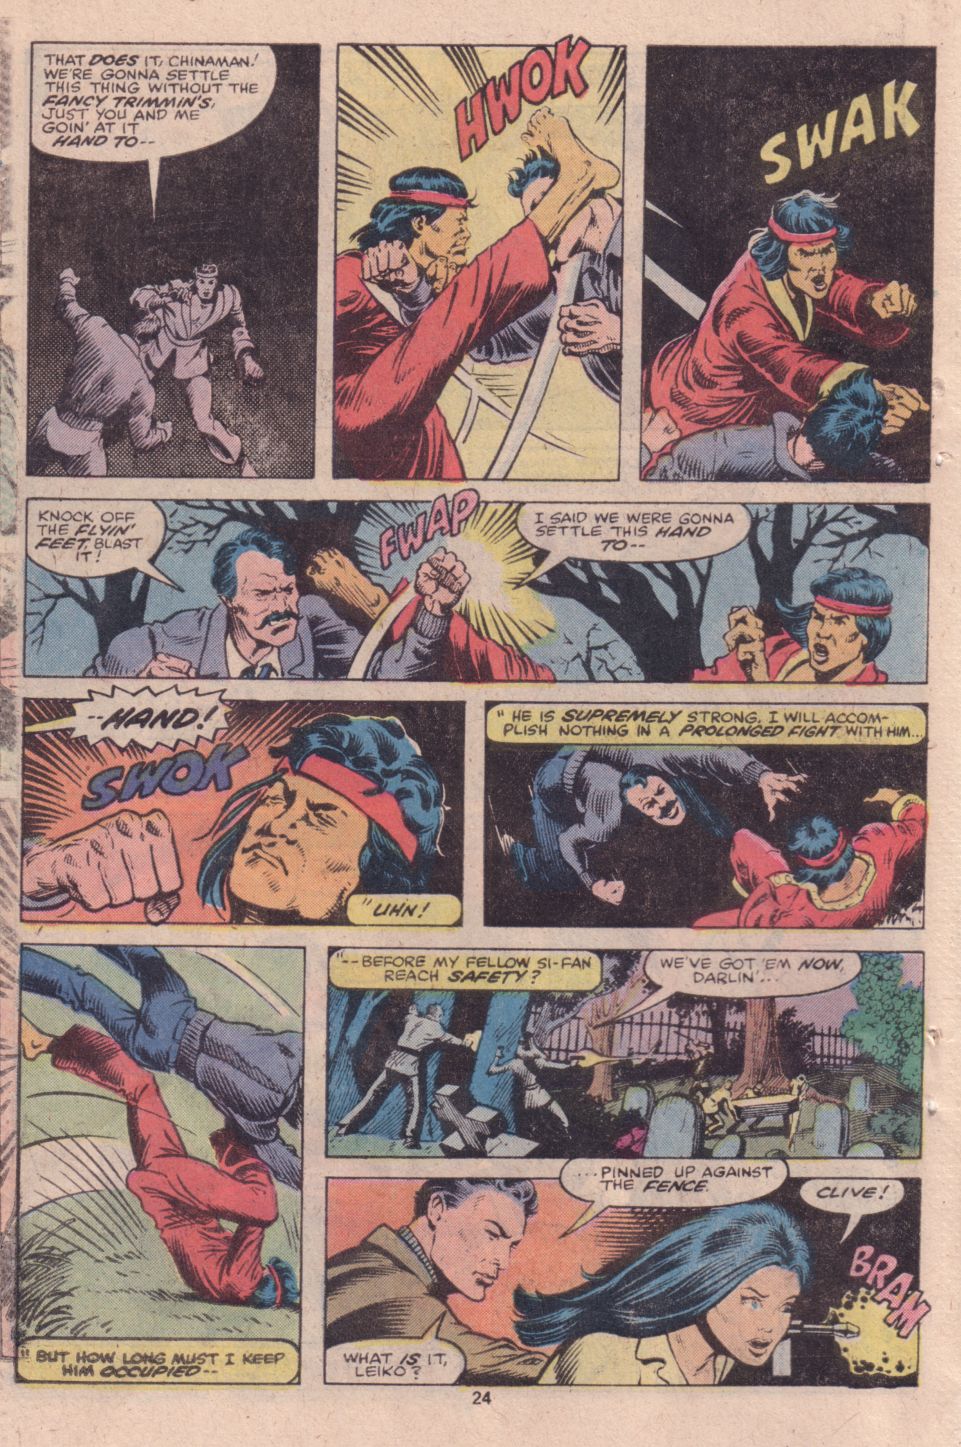 What If? (1977) Issue #16 - Shang Chi Master of Kung Fu fought on The side of Fu Manchu #16 - English 19